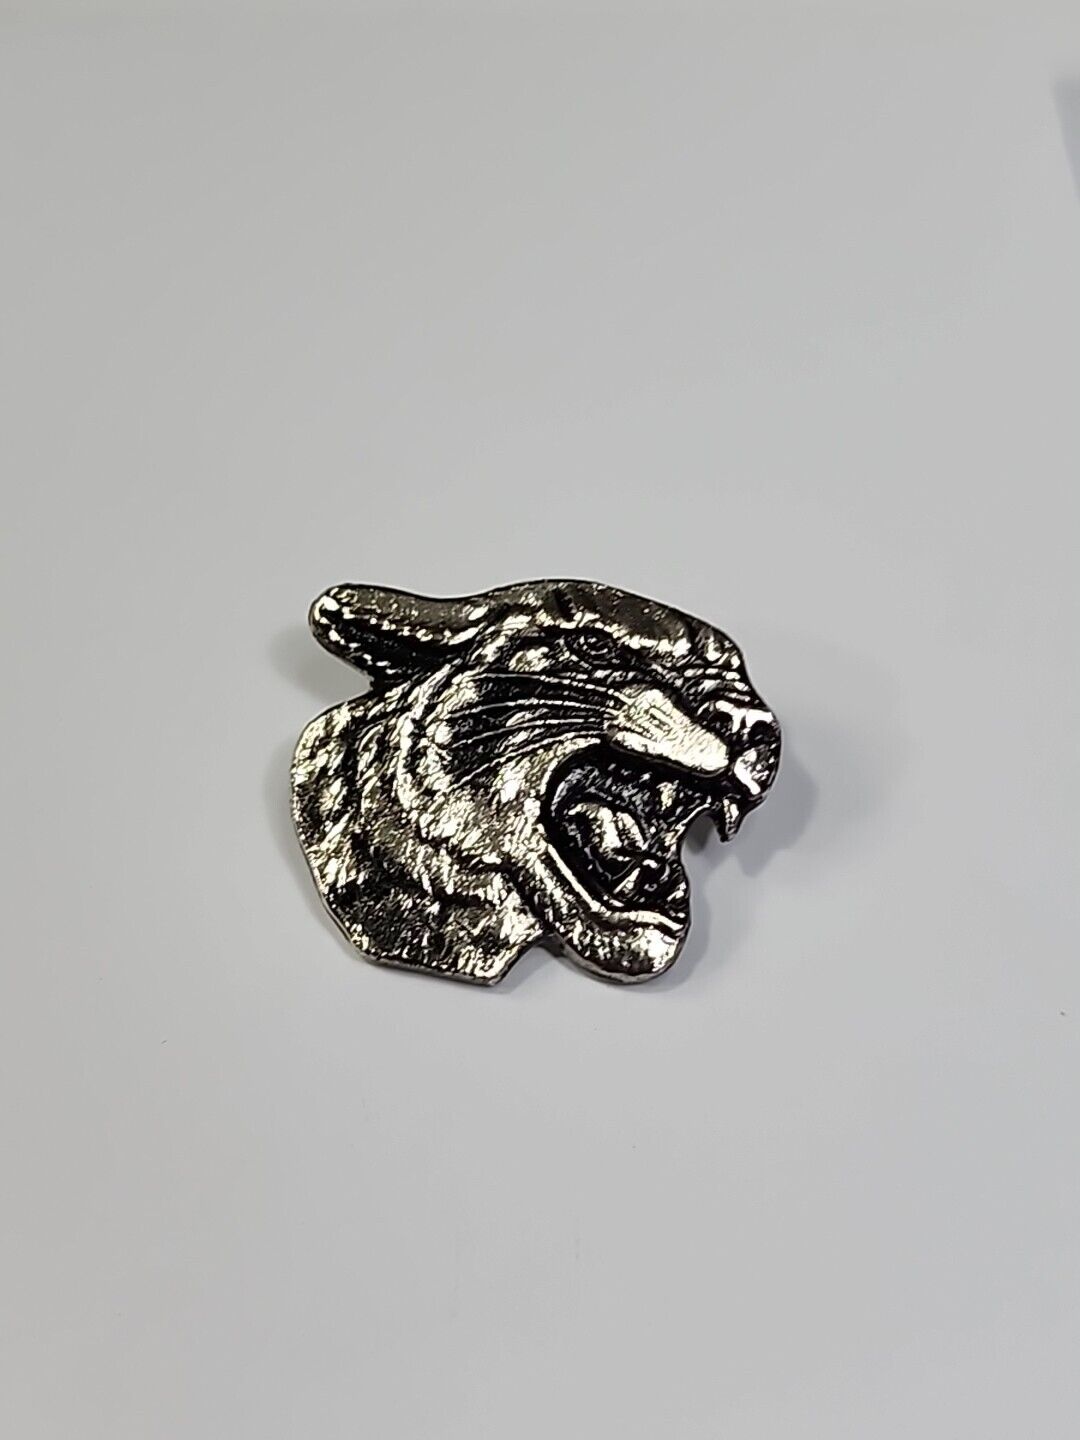 Cougar Mountain Lion Pin Silver Color by MM Limited Chicago